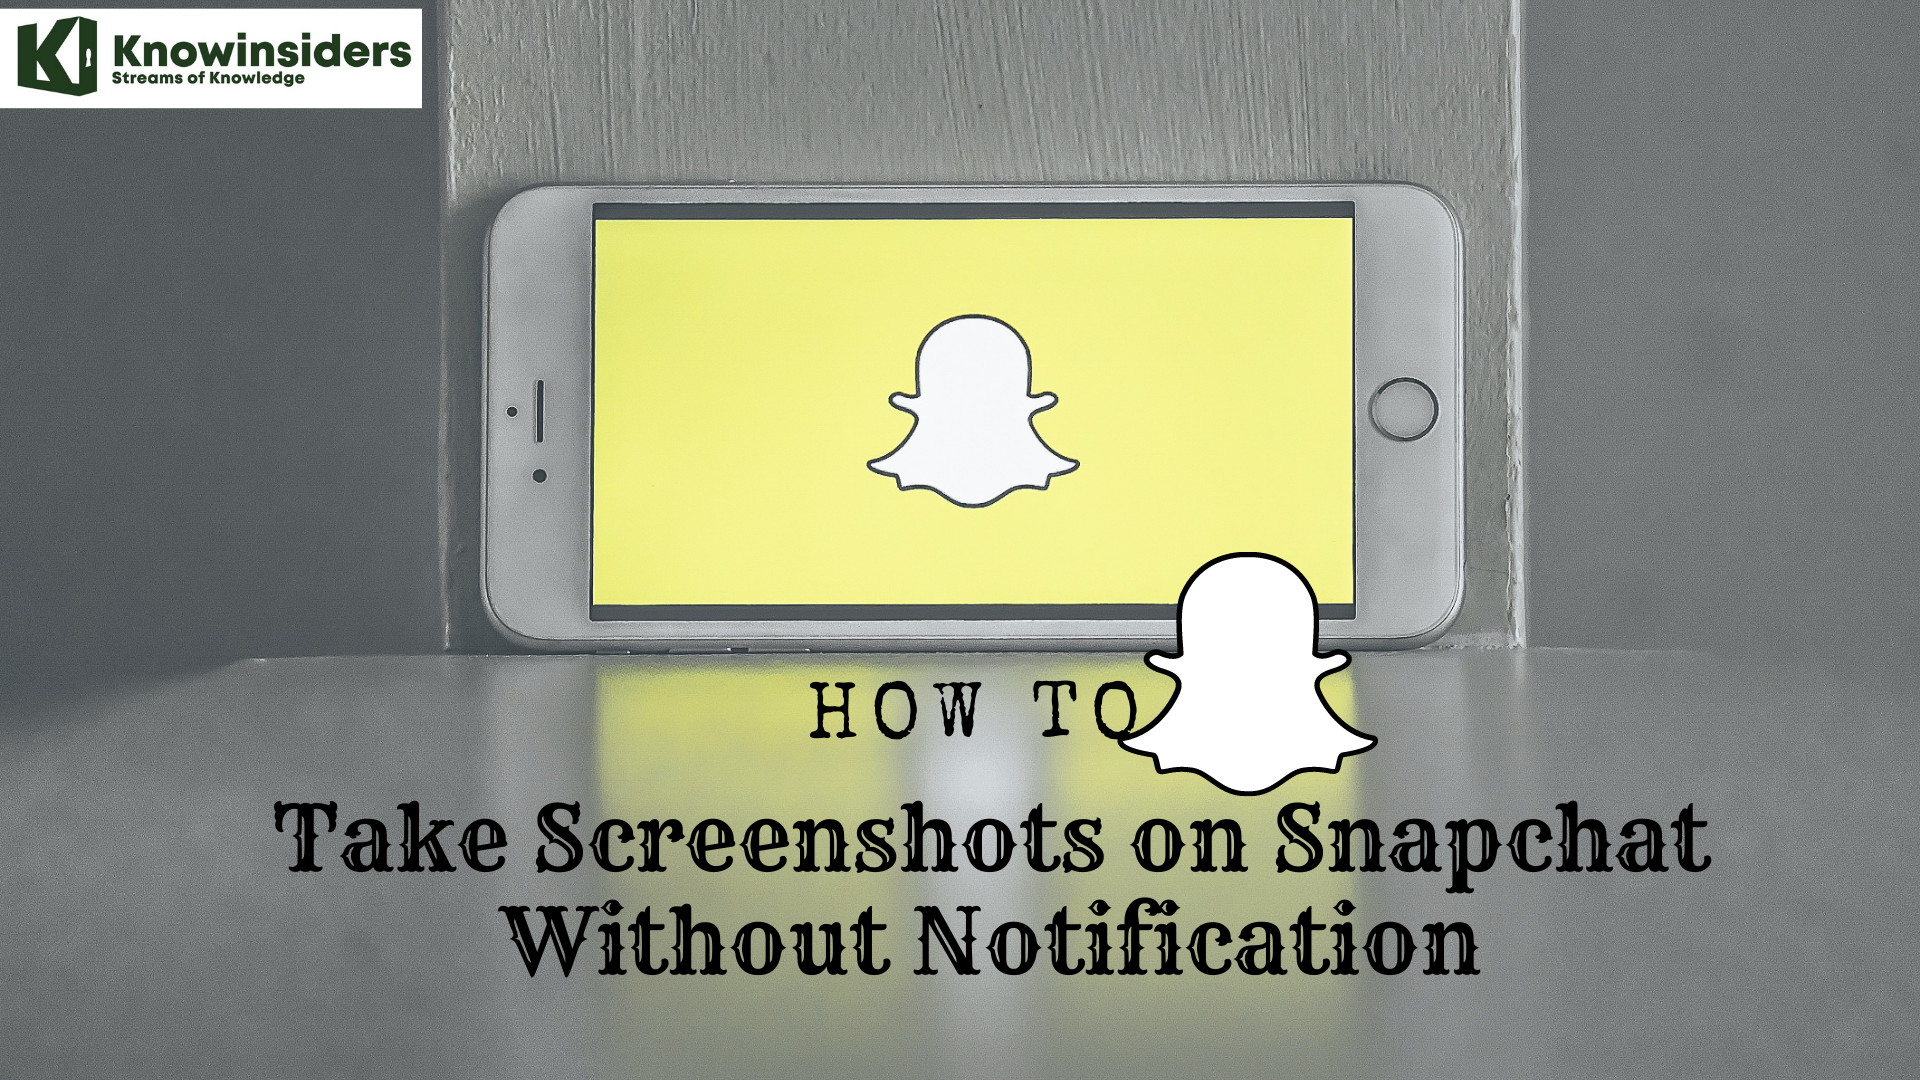 How To Take Screenshot on Snapchat: Top 4 Simplest Methods